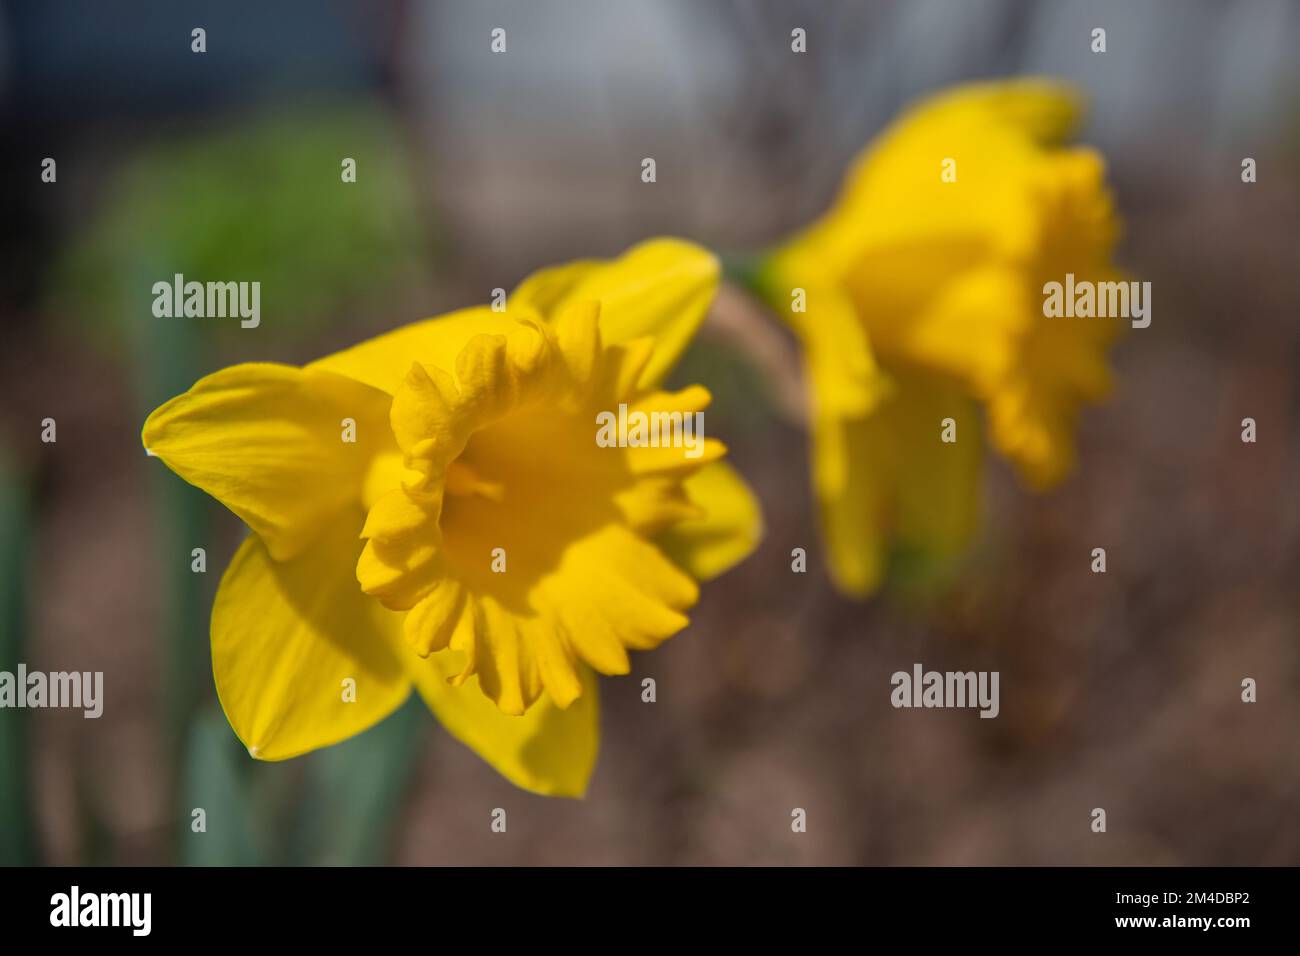 Closeup of yellow narcissus flowers outdoor against natural background Stock Photo